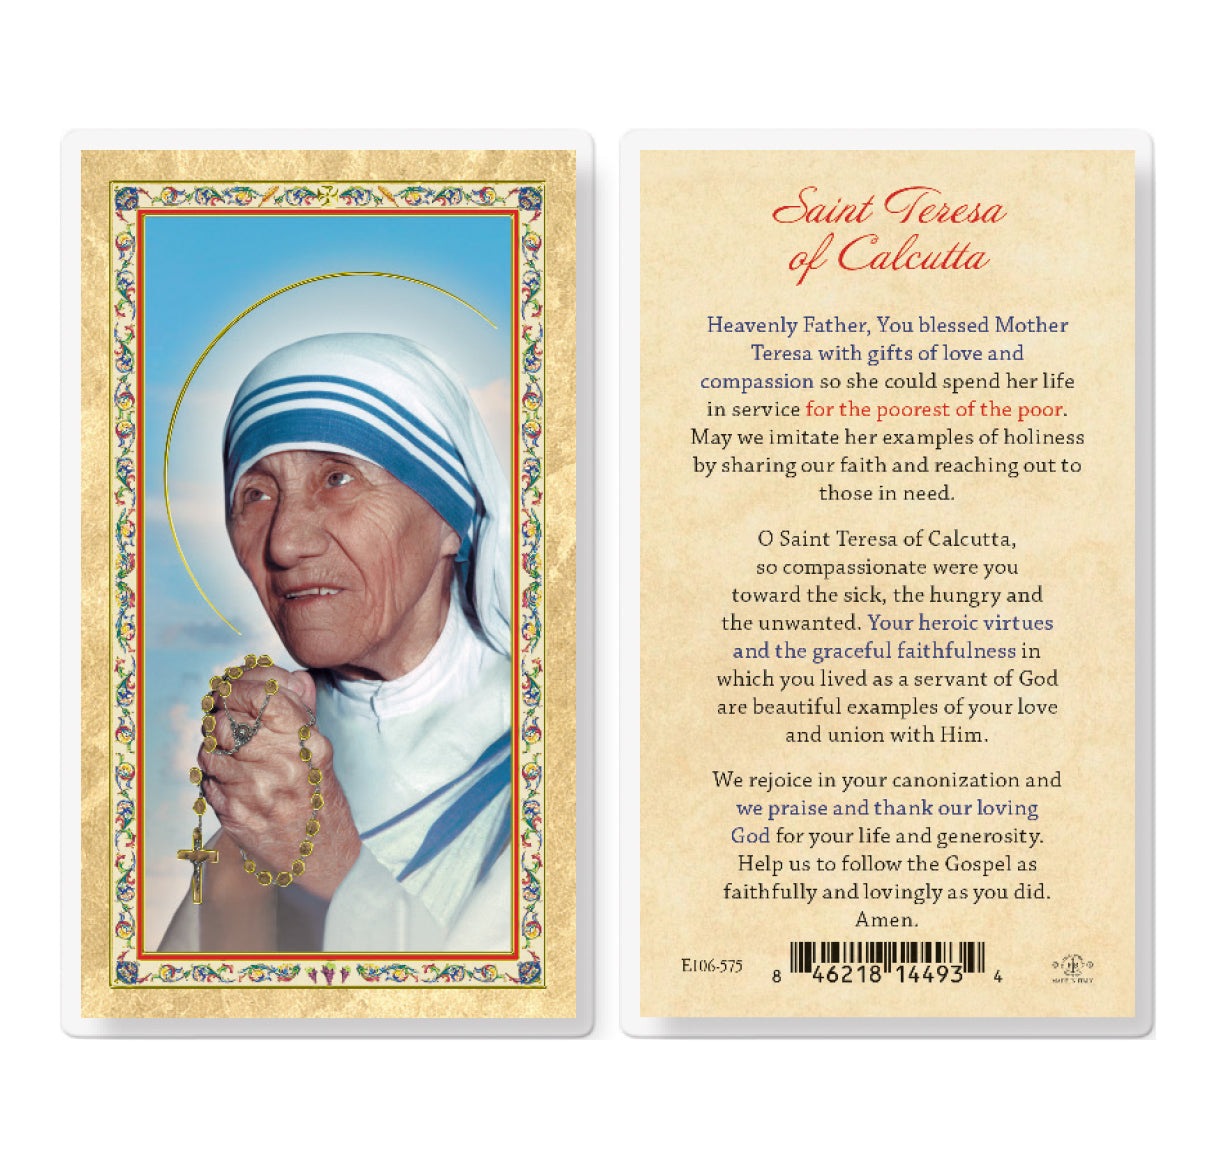 Saint Teresa of Calcutta - With Prayer Gold-Stamped Laminated Catholic Prayer Holy Card with Prayer on Back, Pack of 25